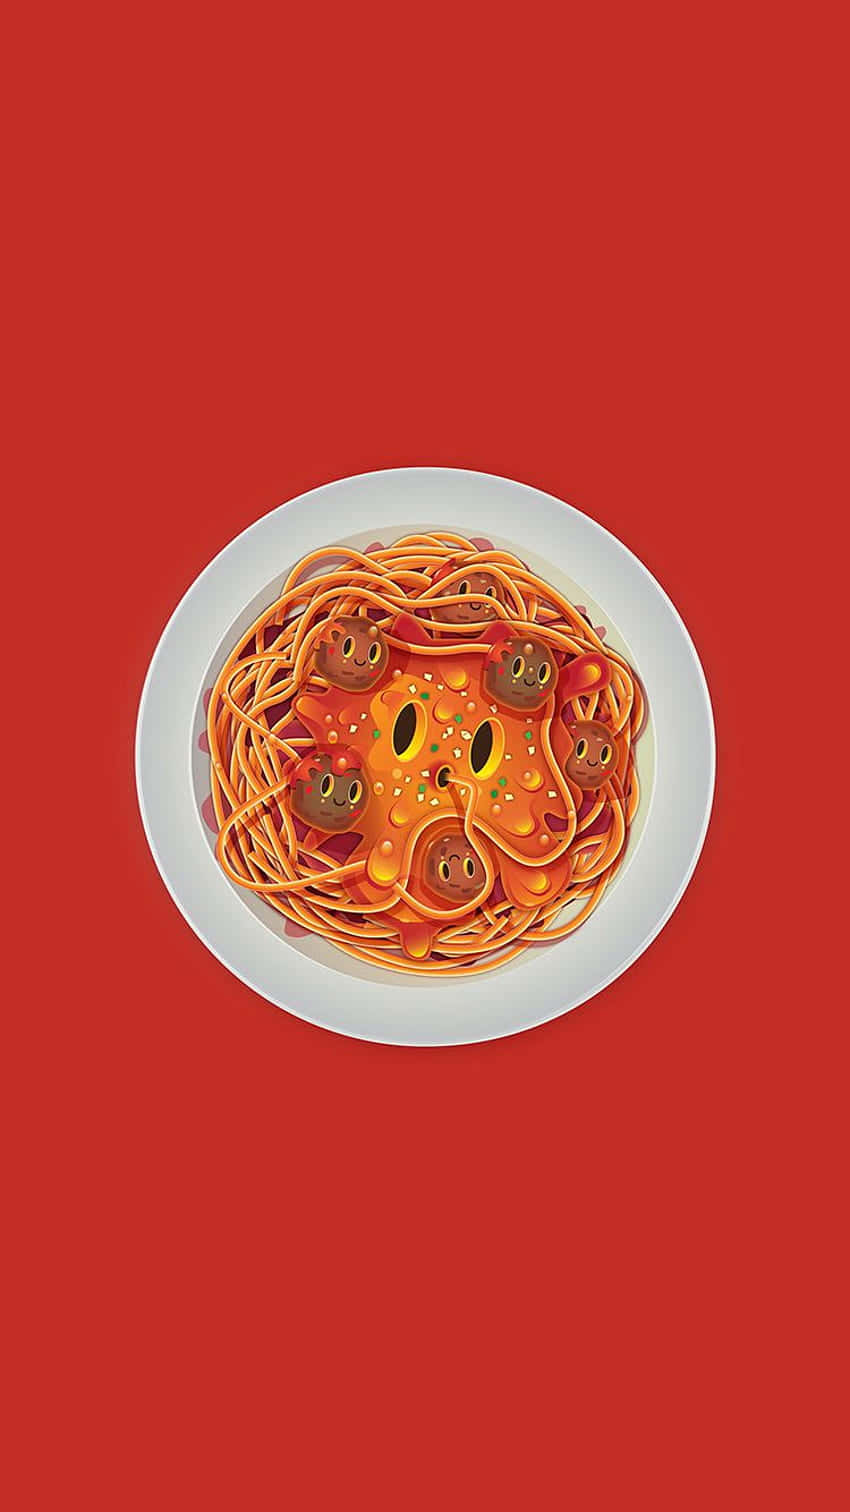 Android Pasta Background Cartoon Plate Of Spaghetti